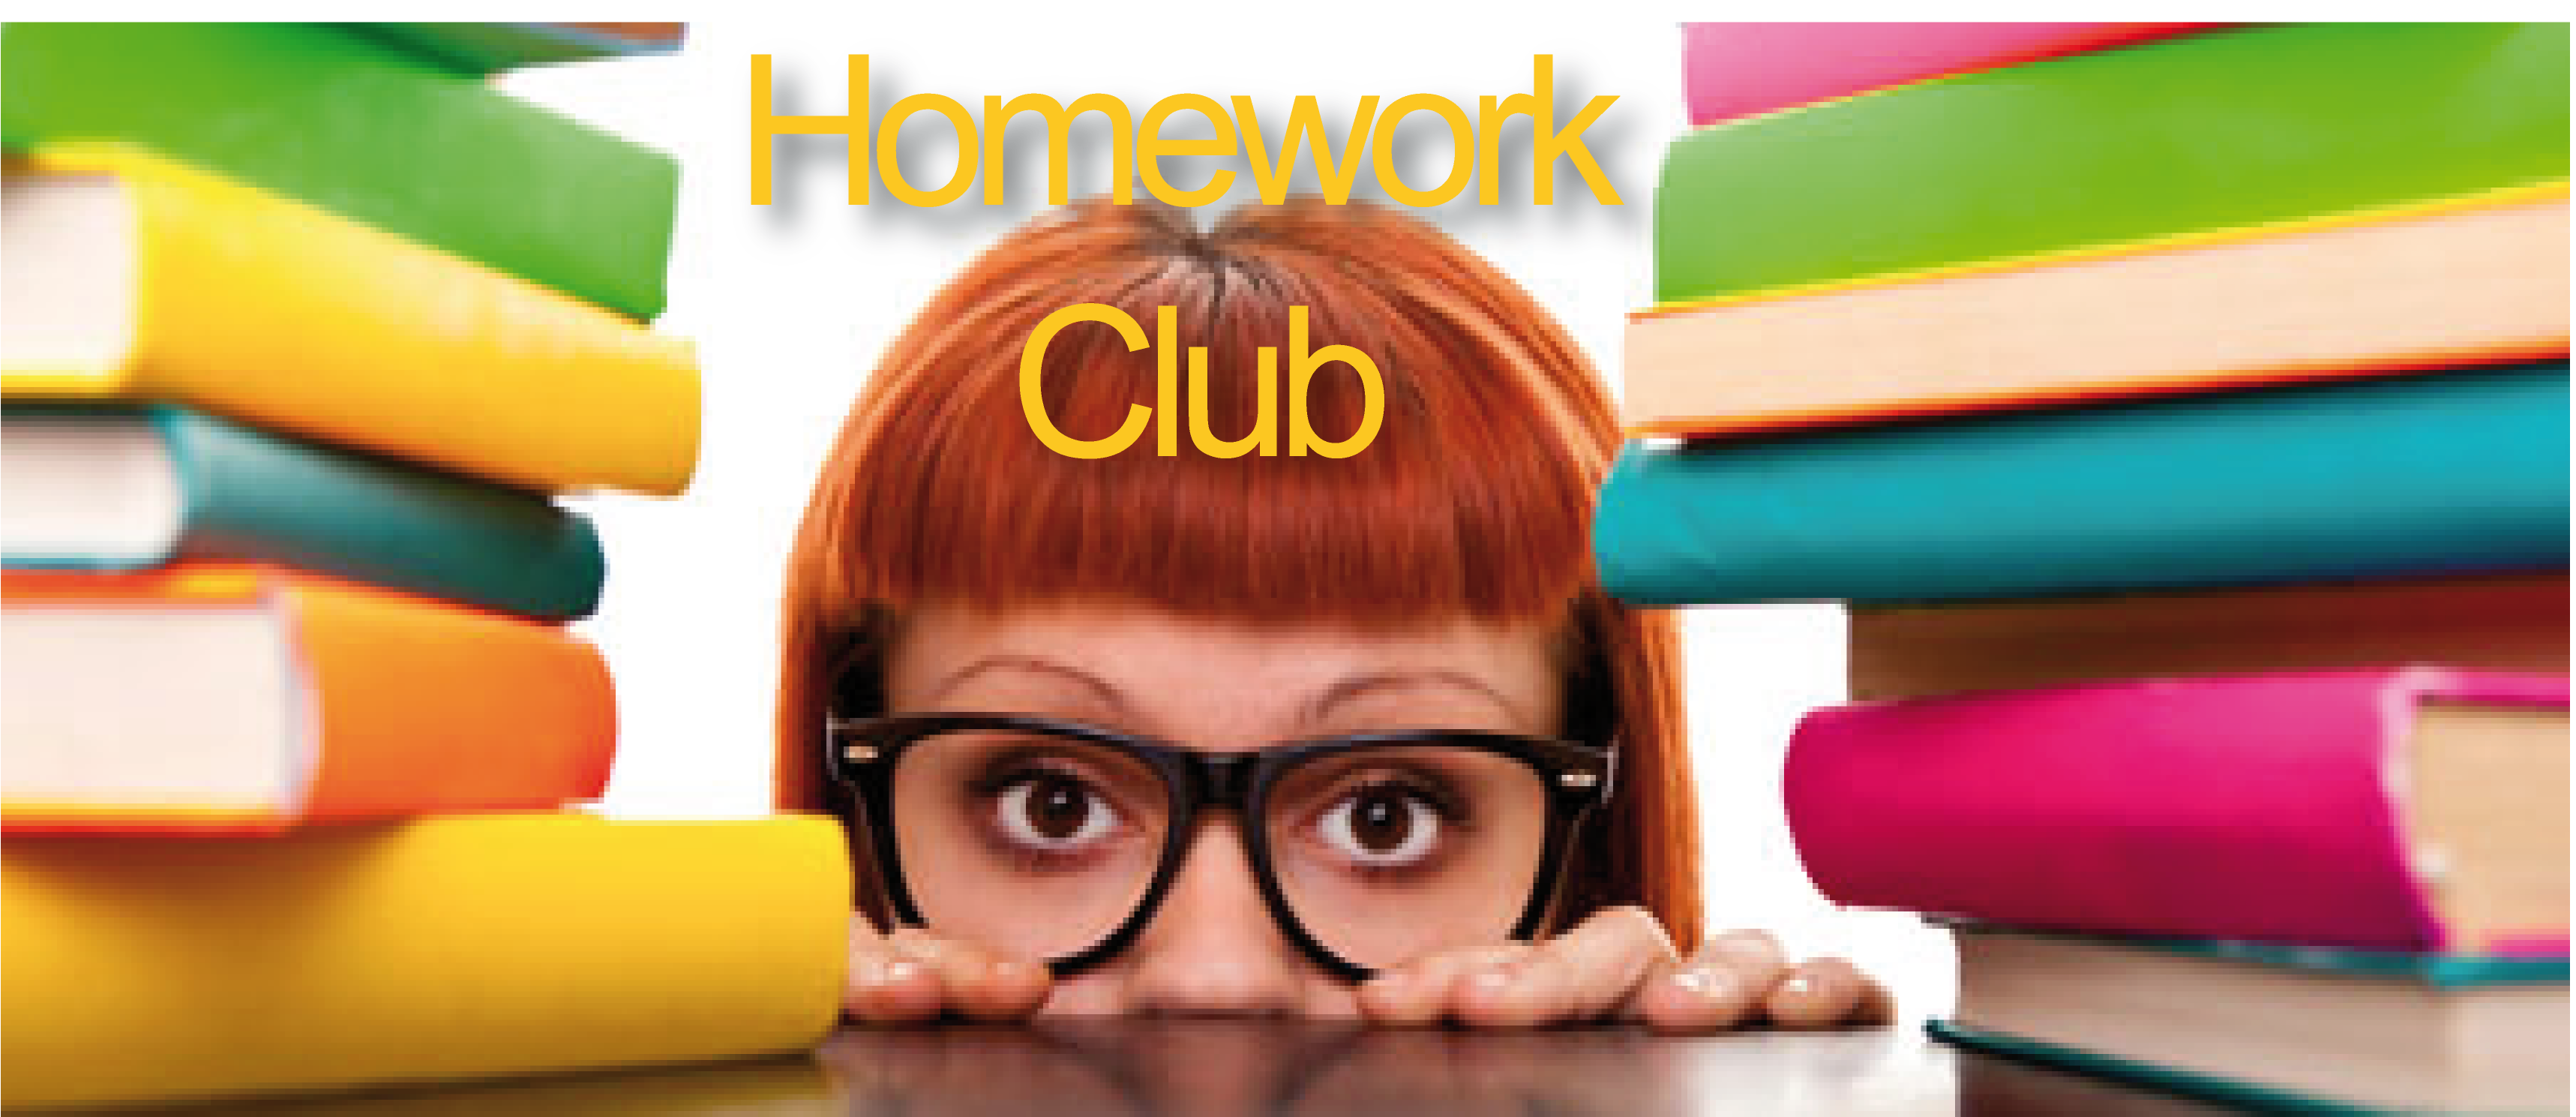 the homework club meaning